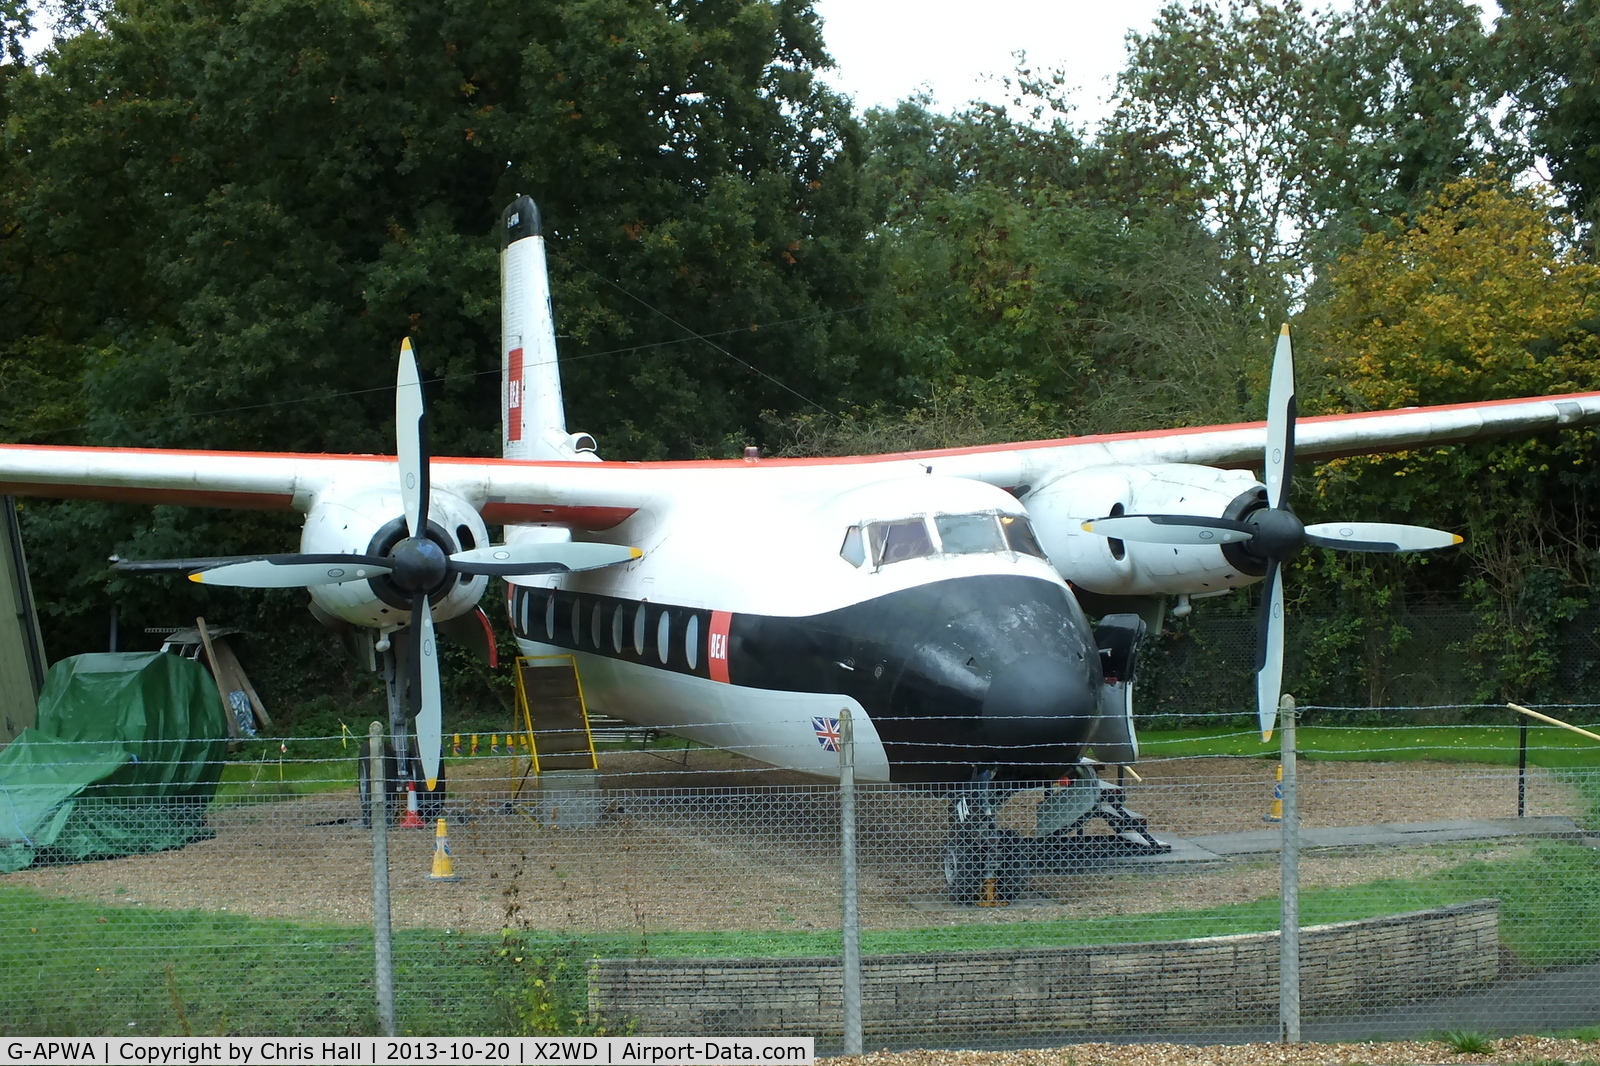 G-APWA, 1959 Handley Page HPR-7 Herald 201 C/N 149, Relocated to the Museum of Berkshire Aviation from Southend in 1993. Over 14,000 man-hours were spent on its restoration